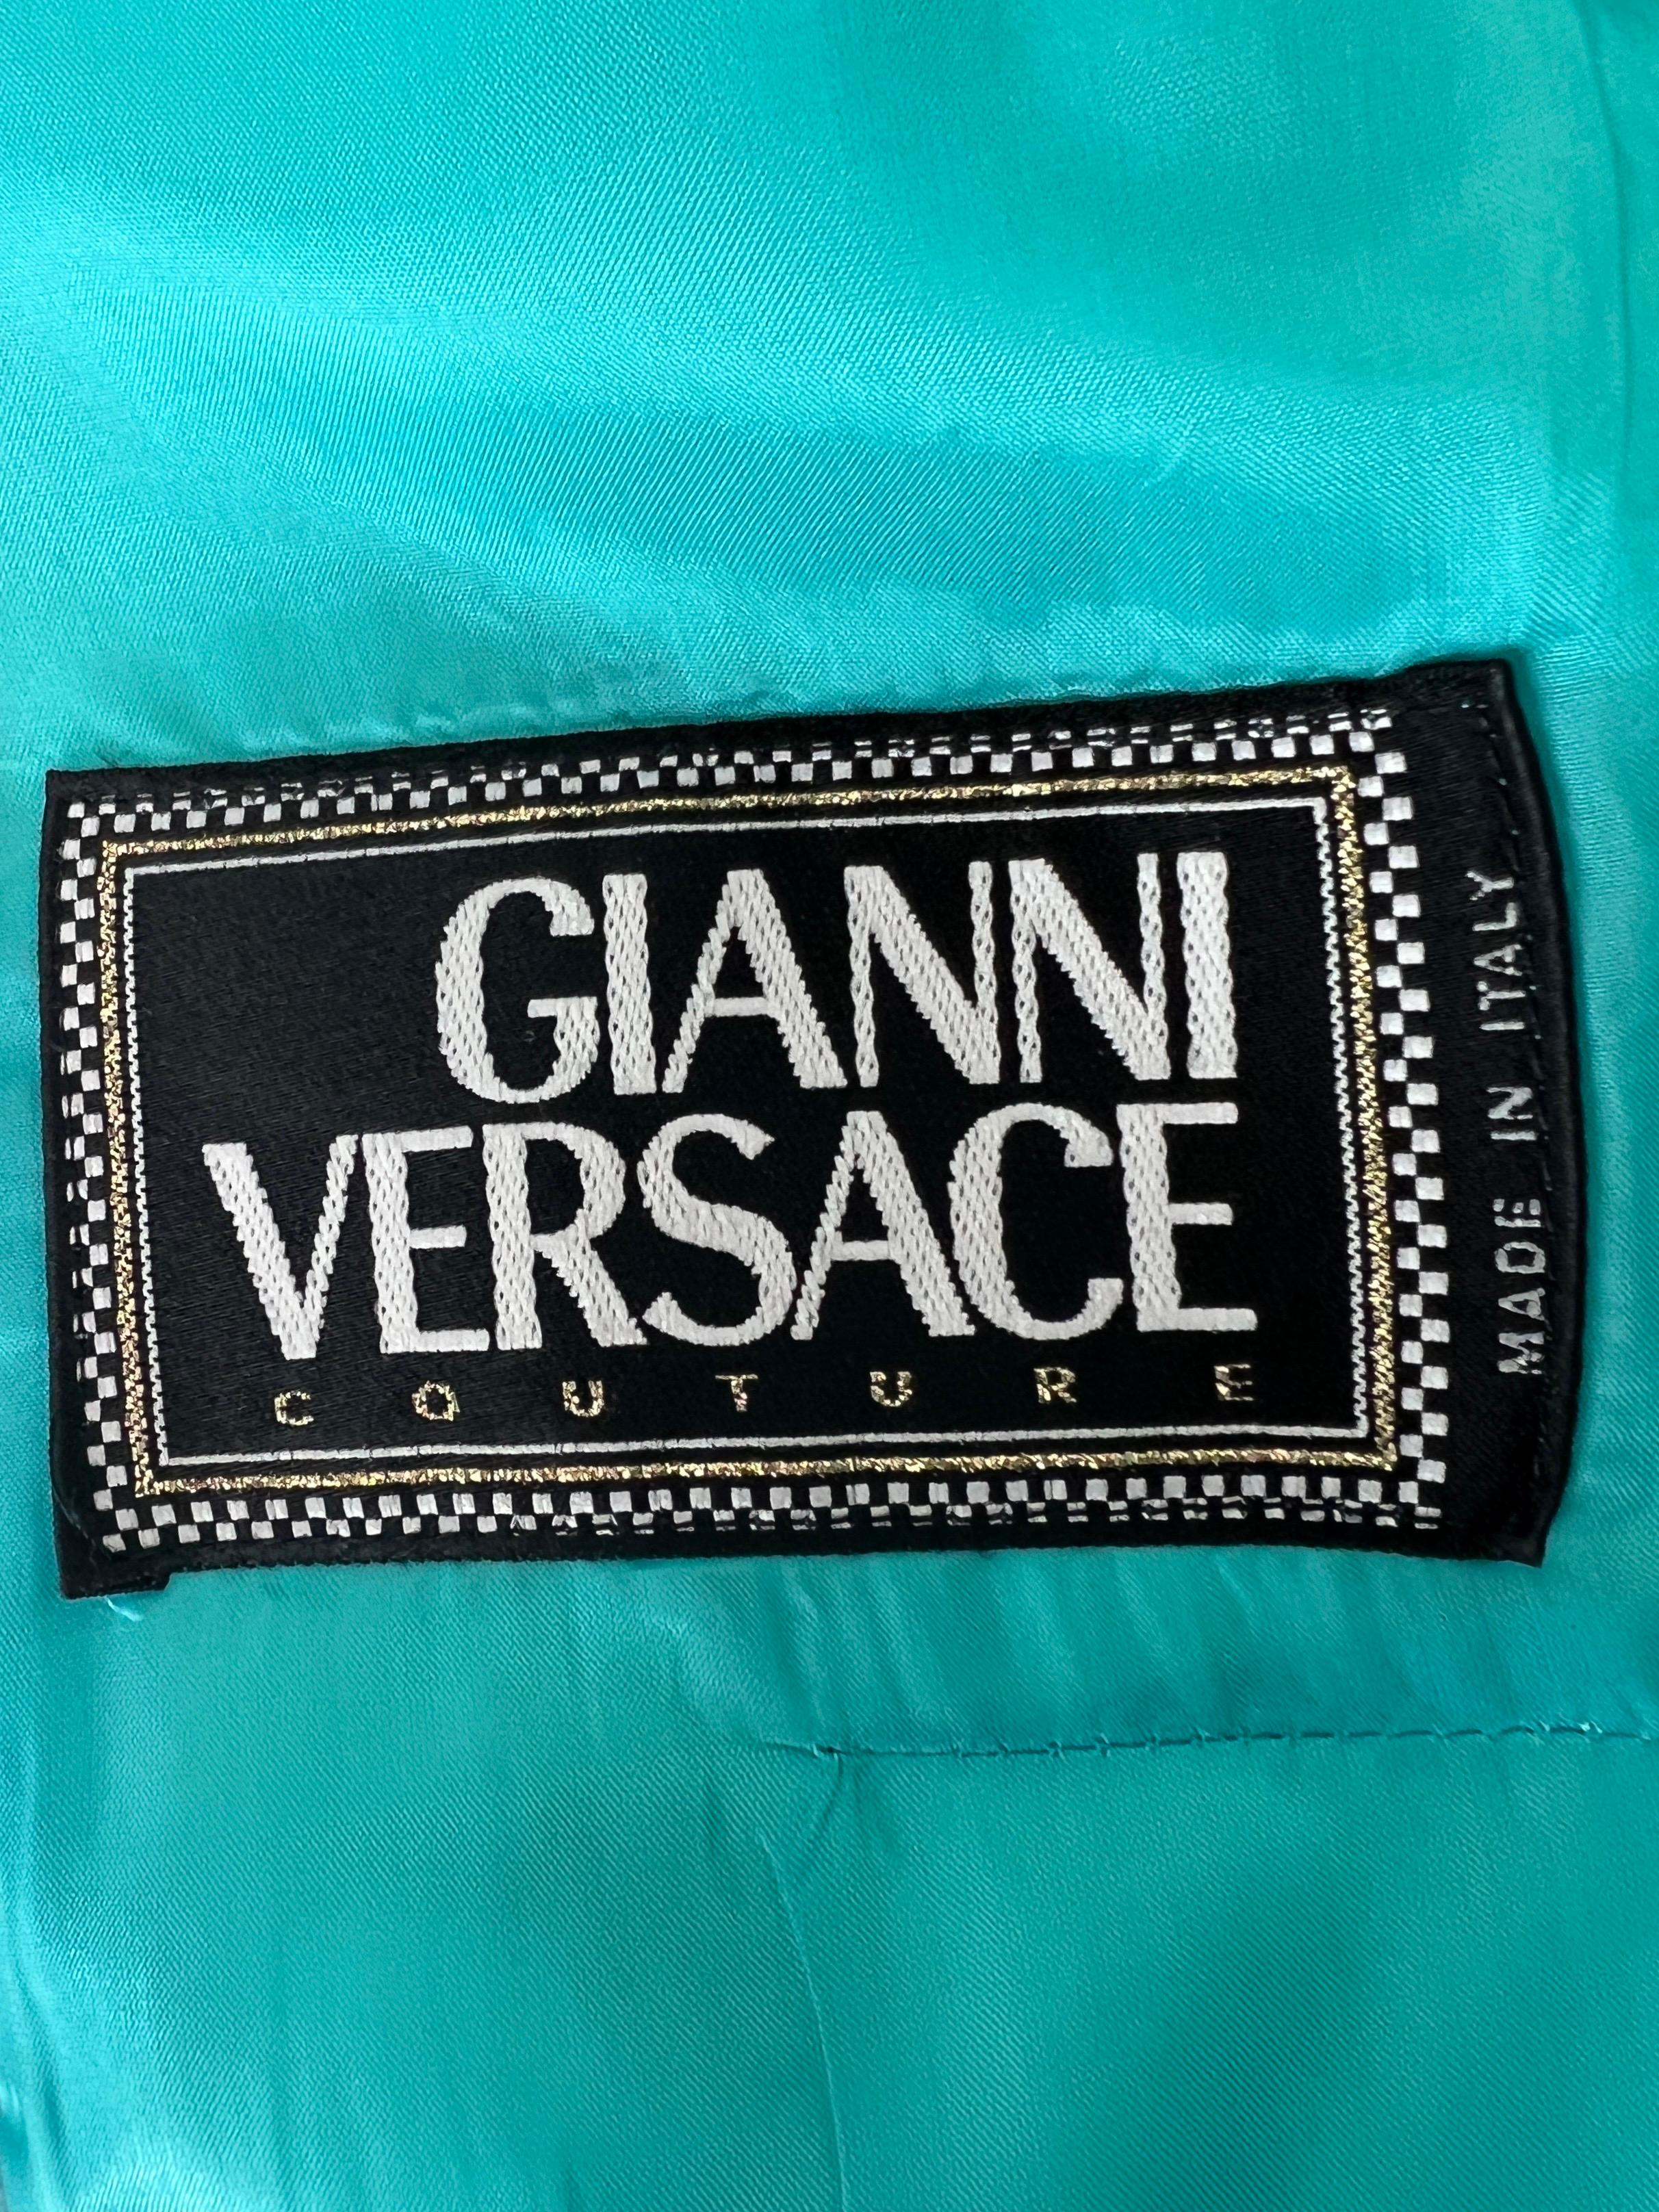 Gianni Versace Fall 1995 Wool Suit For Sale 3